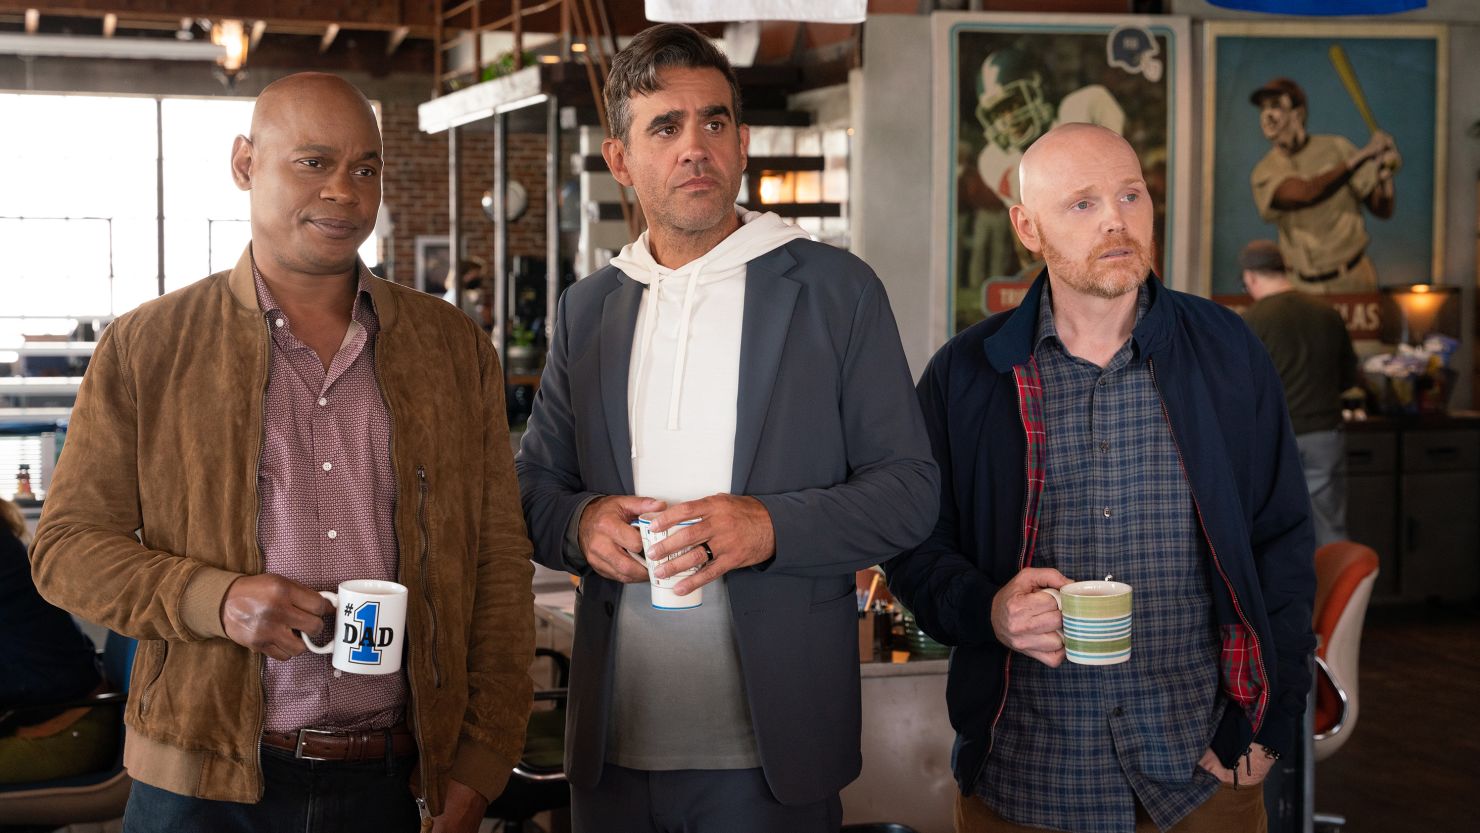 Bokeem Woodbine, Bobby Cannavale and Bill Burr in "Old Dads," which brings Burr's stand-up act to the screen.